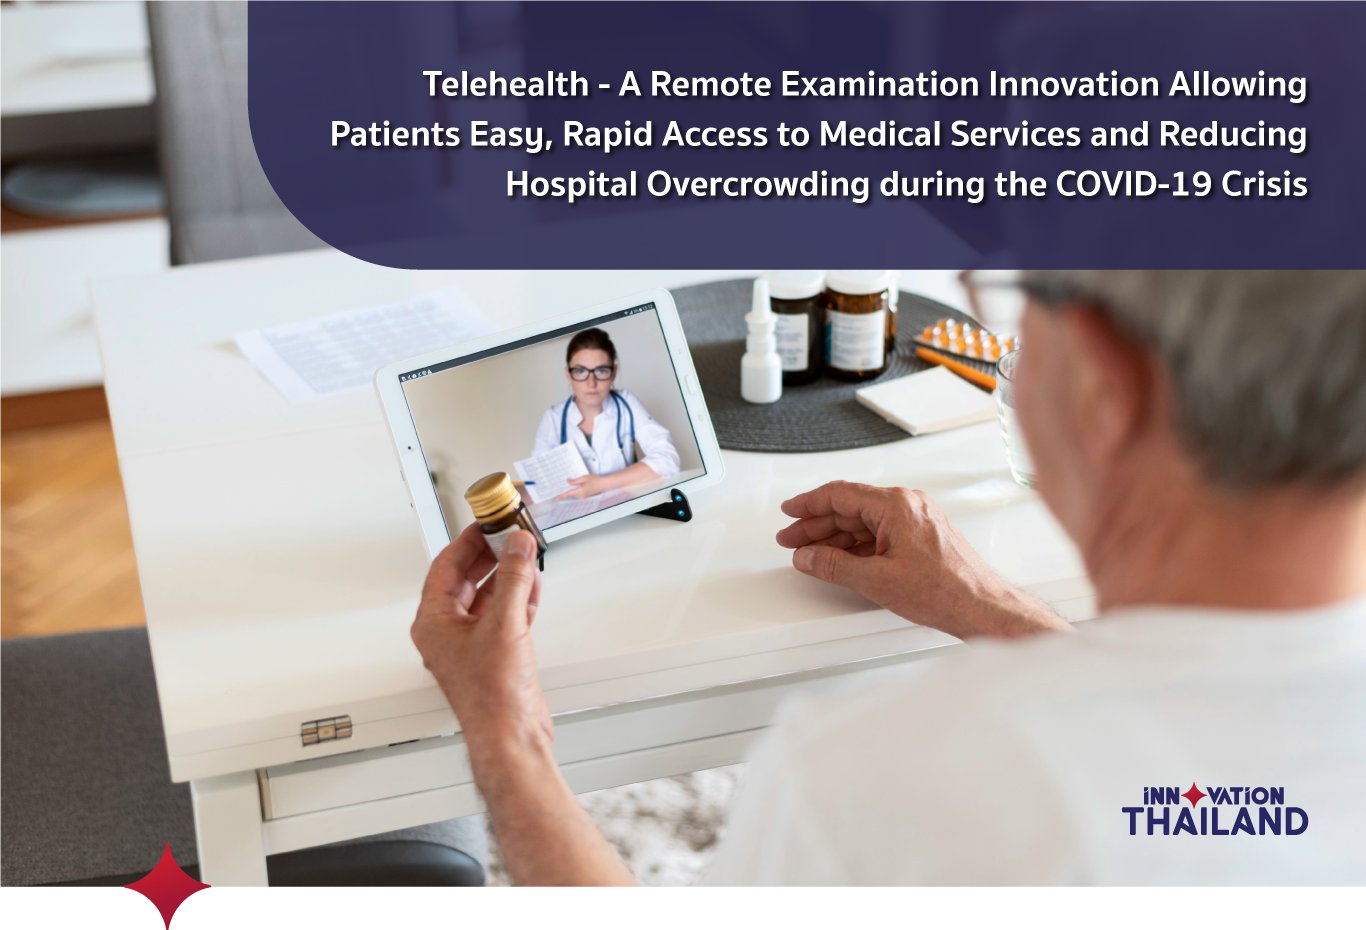 Telehealth – A Remote Examination Innovation Allowing Patients Easy, Rapid Access to Medical Services and Reducing Hospital Overcrowding during the COVID-19 Crisis